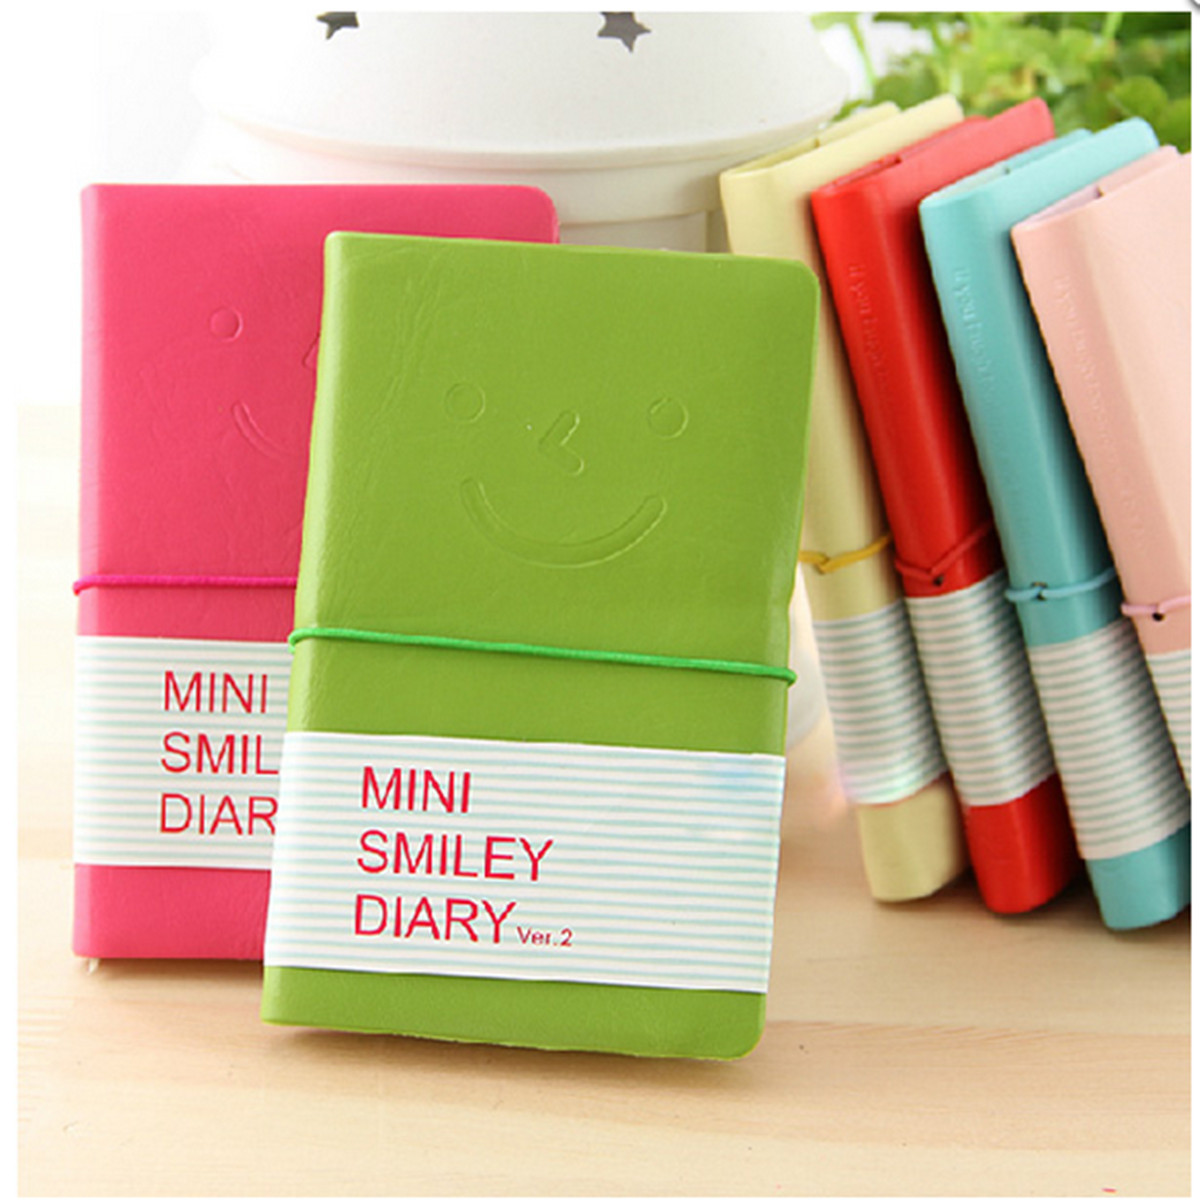 Candy-Colors-Charming-Smiley-Paper-Diary-Notebook-Memo-Book-leather-Note-Pads-Stationery-Pocketbook-1247985-10